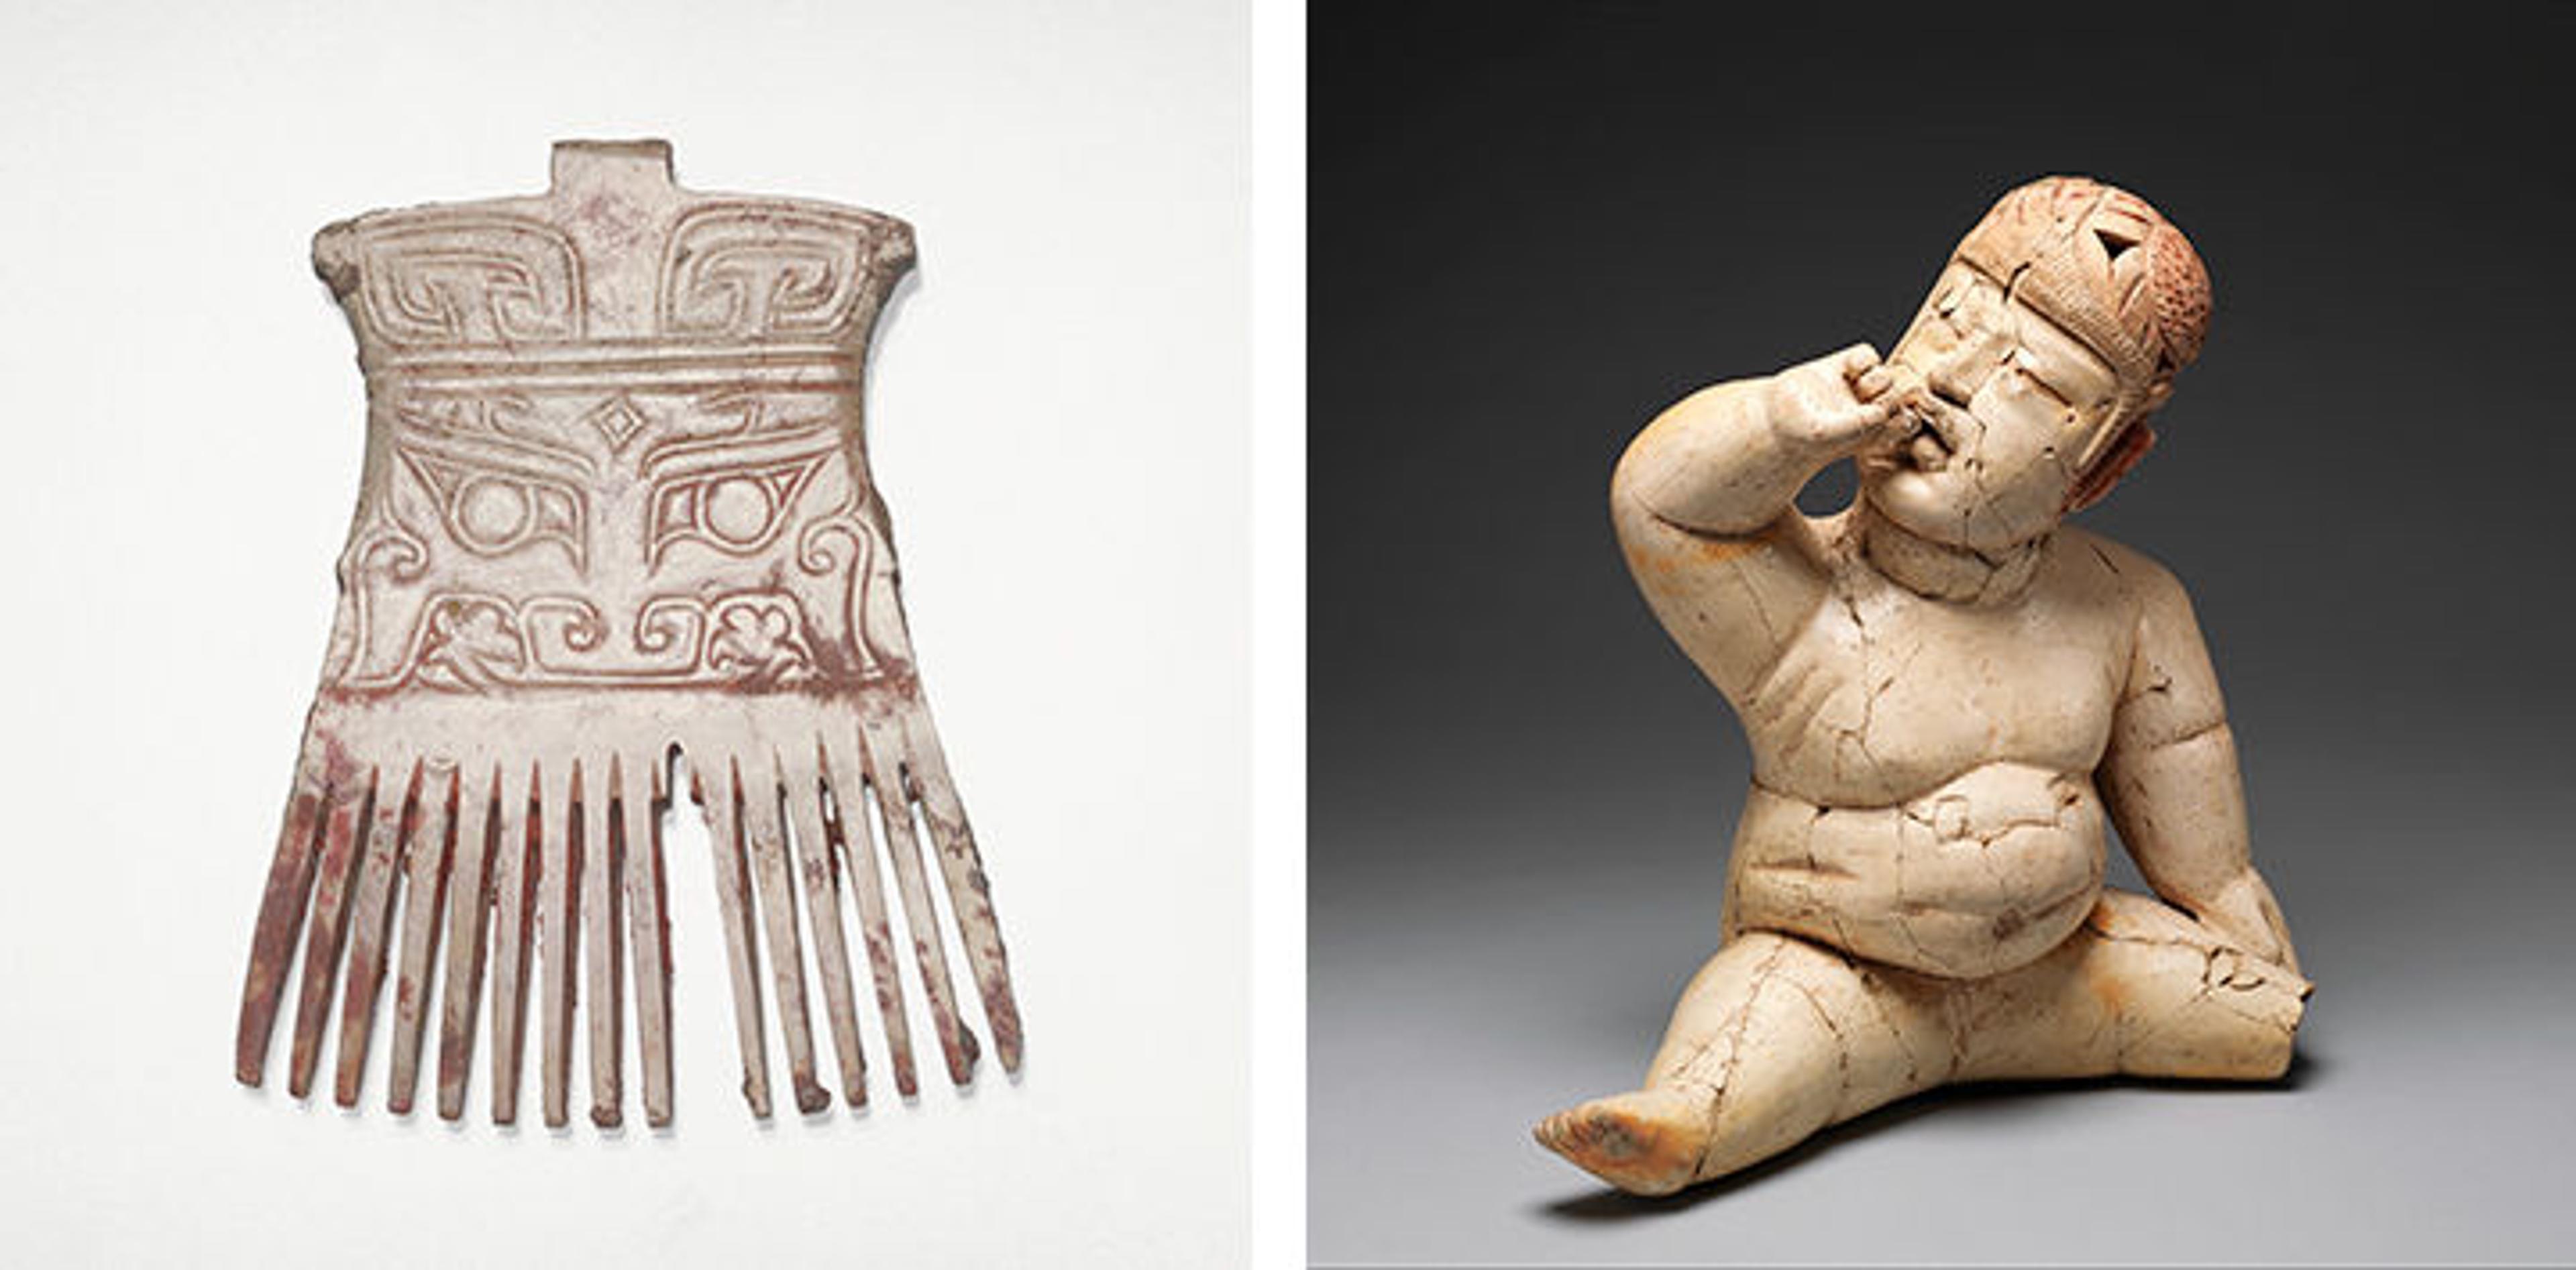 A jade comb from China and a seated ceramic figure from Mesoamerica